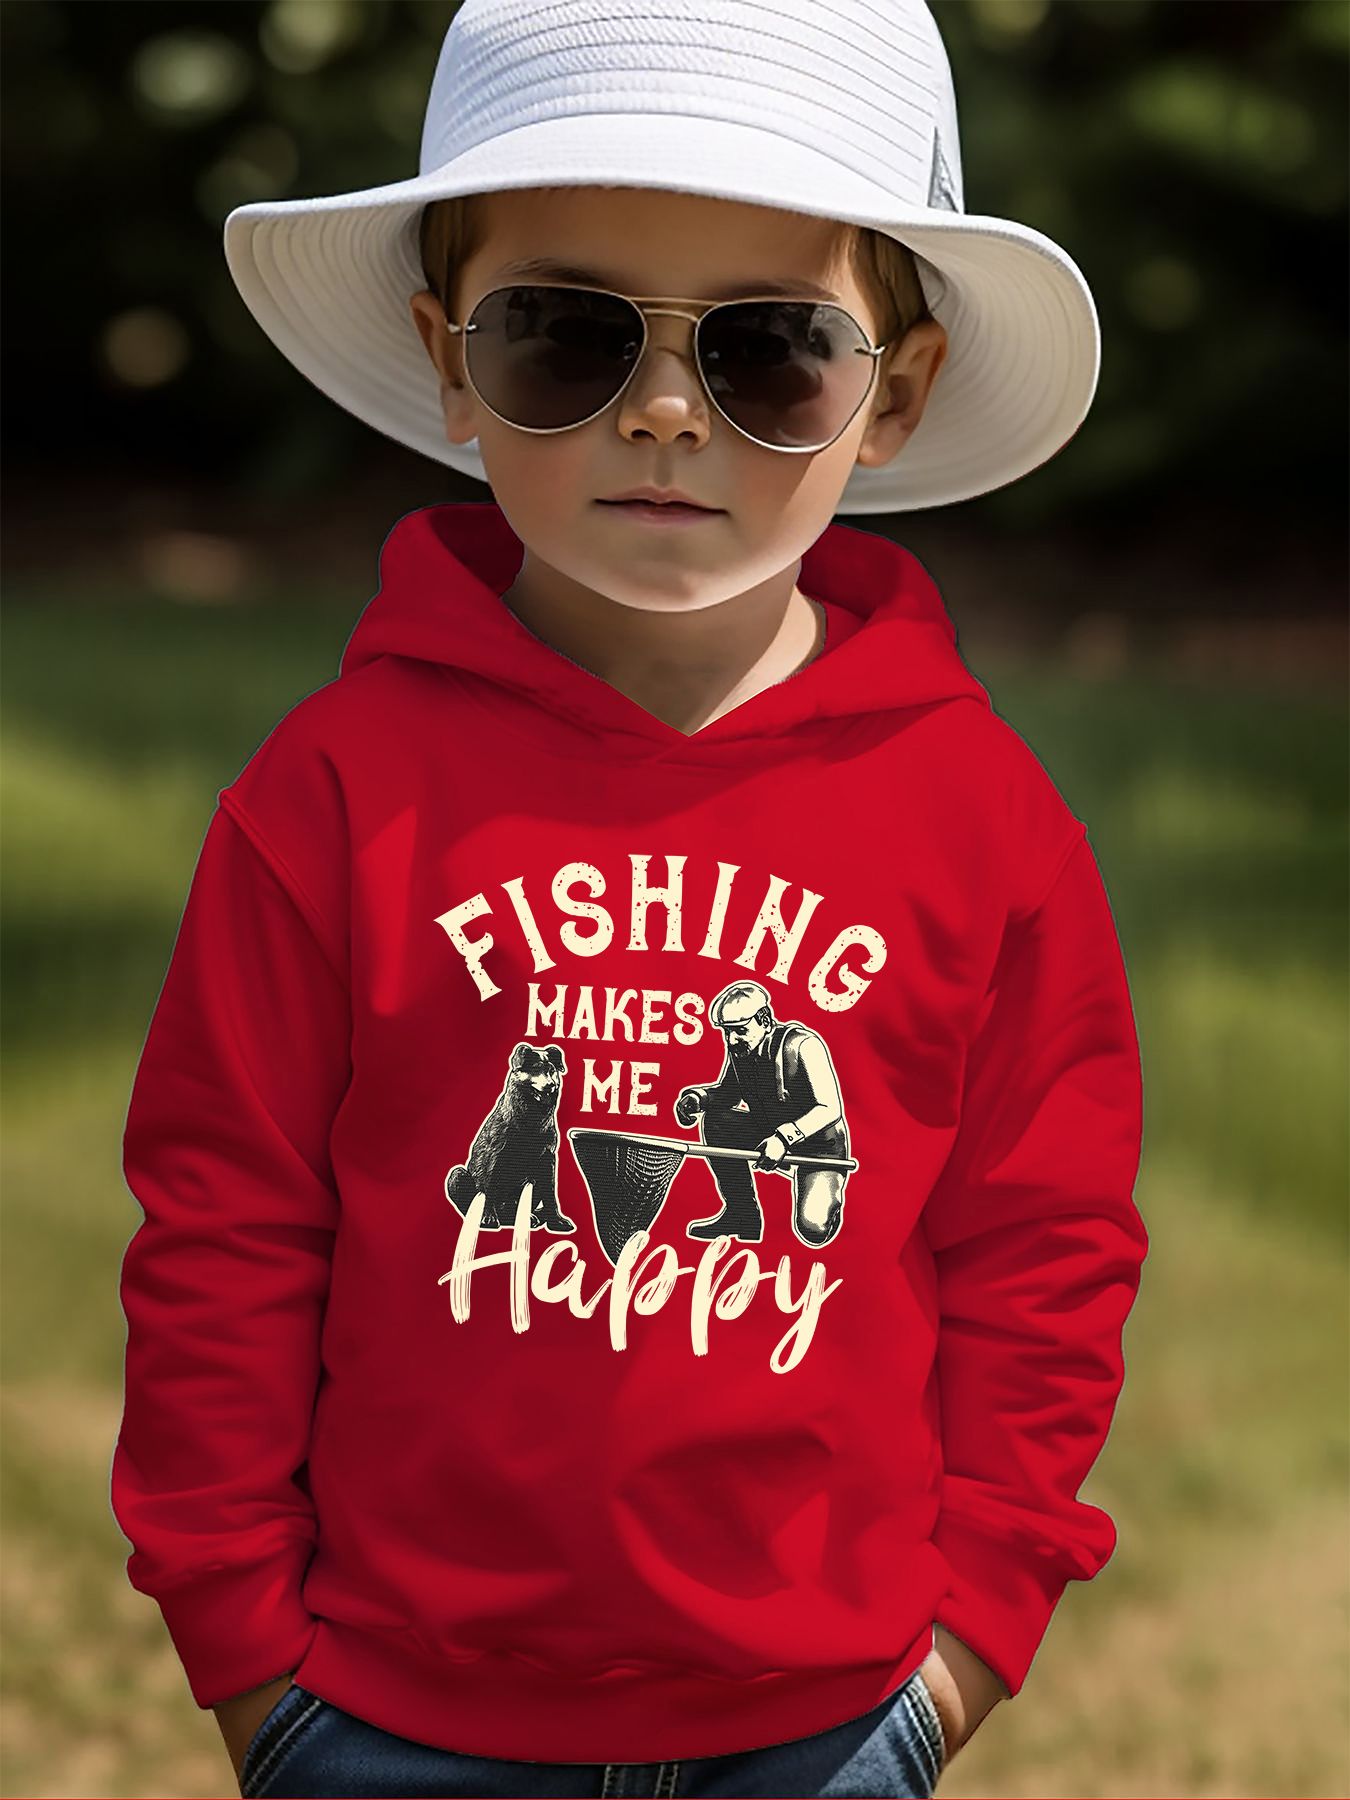 FISHING MAKS ME HAPPY Print Kid's Hoodie, Causal Pullover, Hooded Long Sleeve Top, Boy's Clothes For Spring Fall, As Christmas Gift